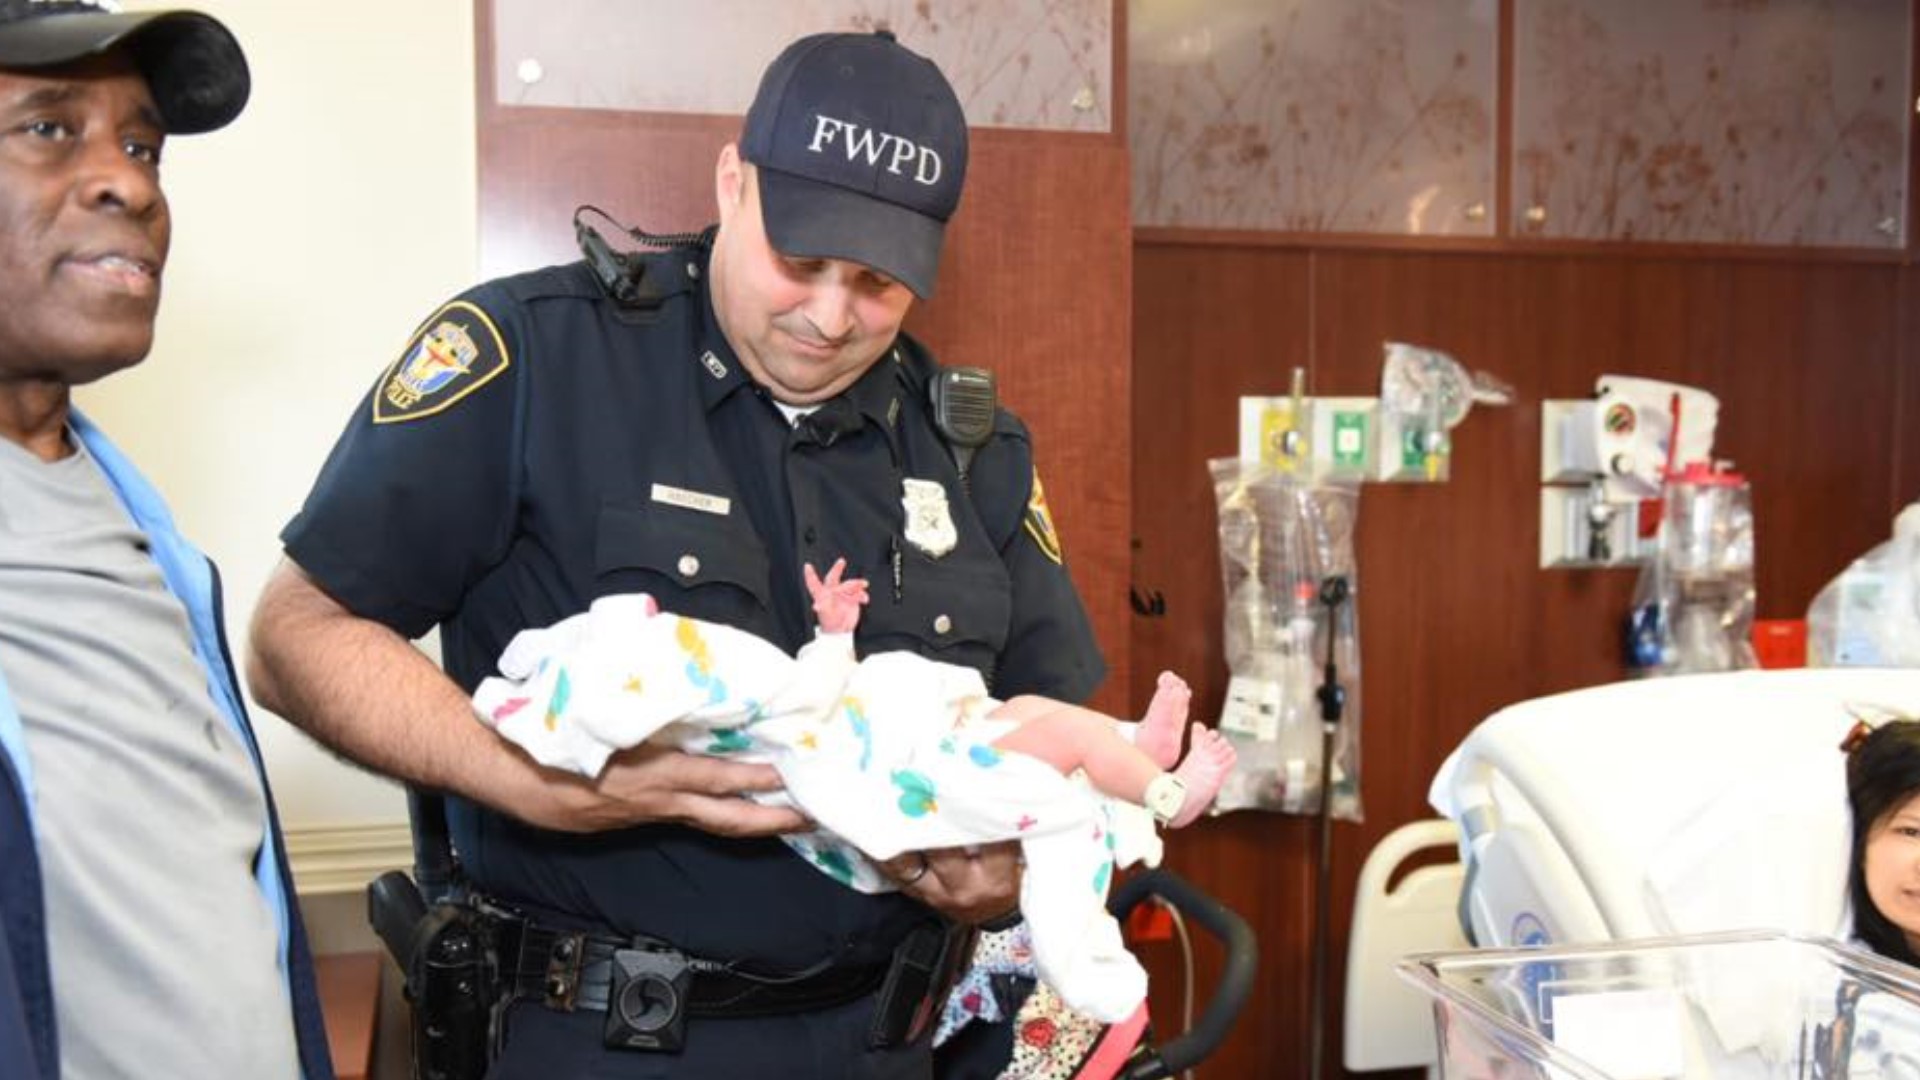 With heavy traffic on Thursday morning, baby Alysson was unexpectedly born in the car.